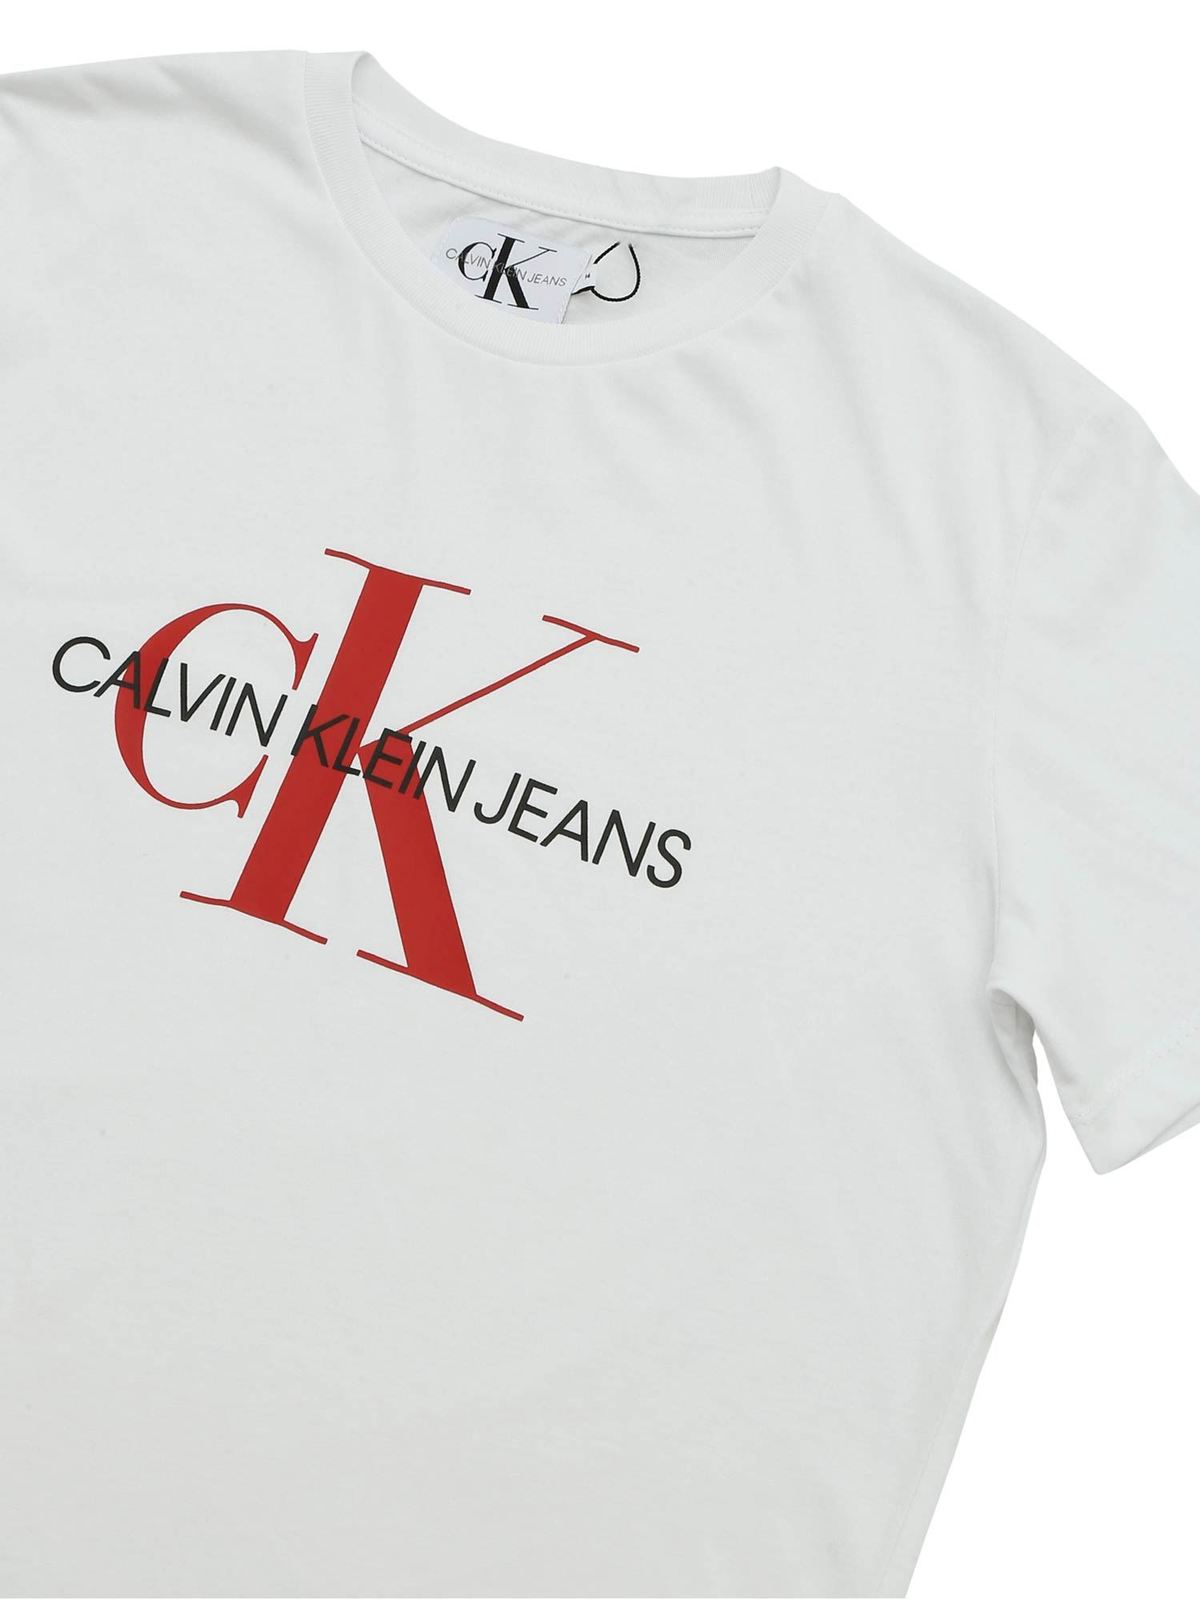 calvin klein white and red t shirt